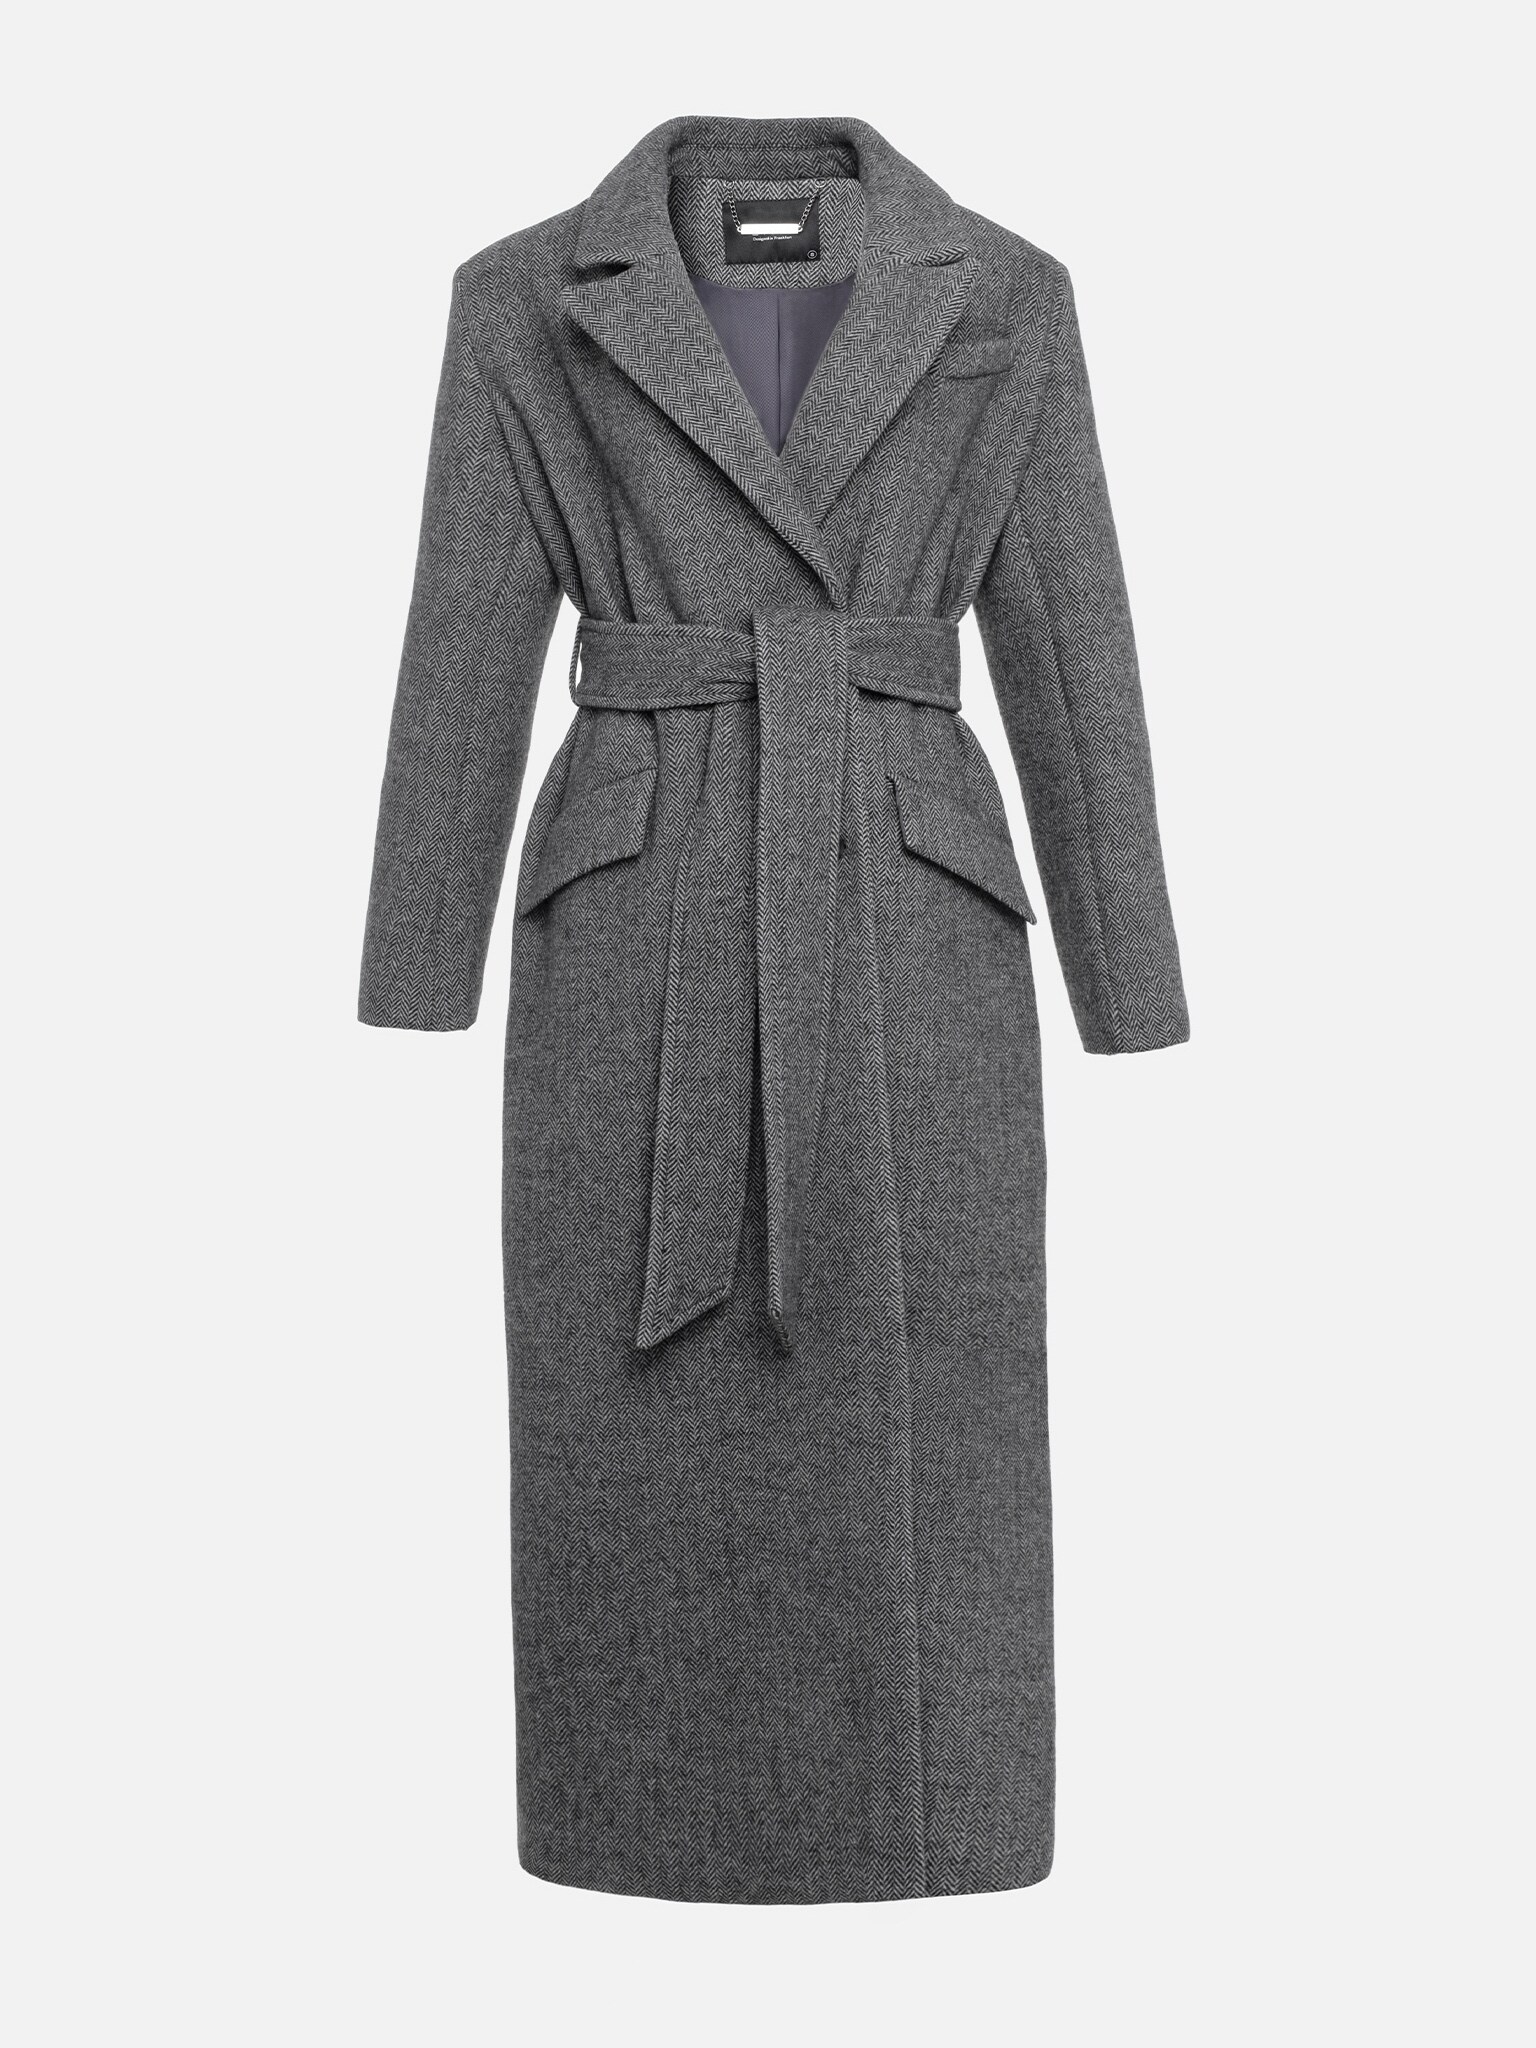 Woollen maxi coat with small ornaments